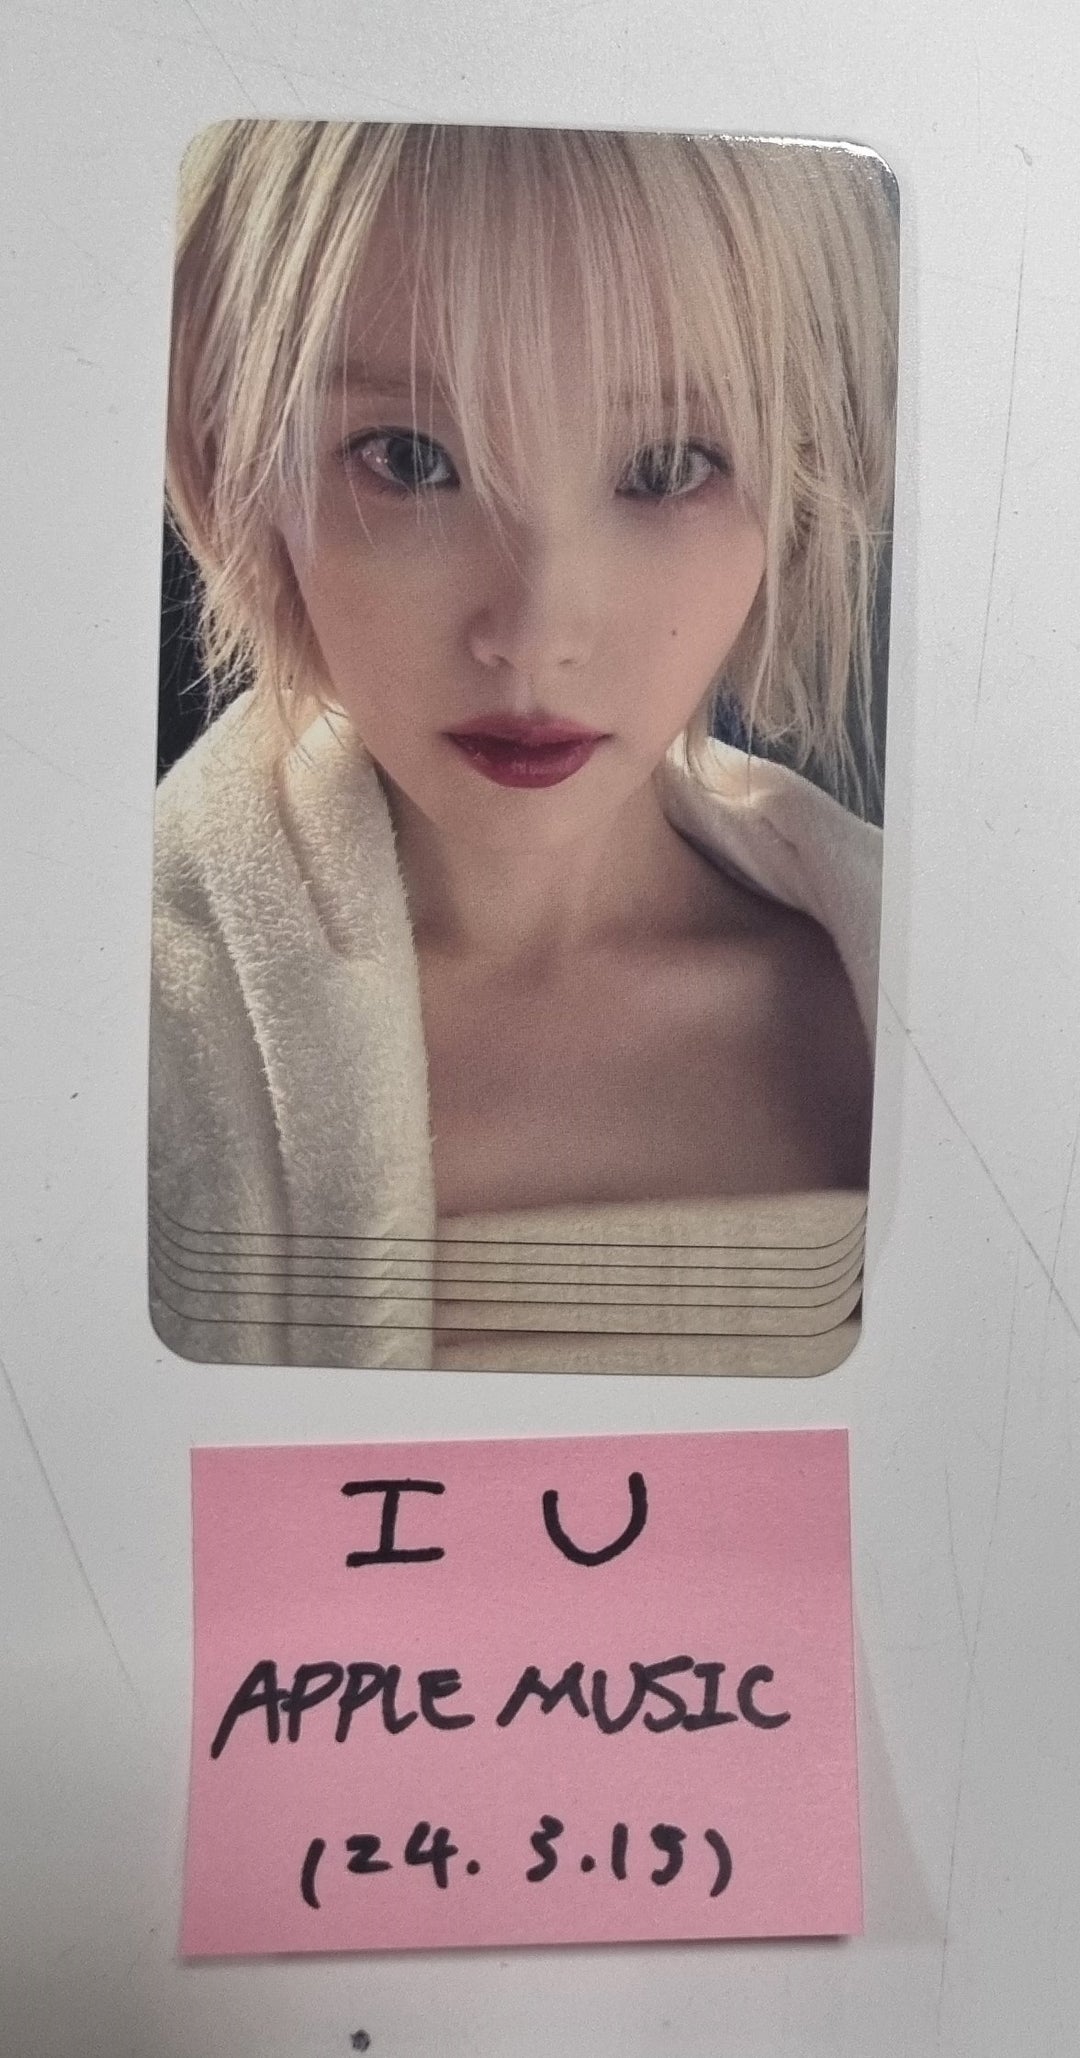 IU "The Winning" - Apple Music Fansign Event Photocards Round 2 [24.3.15]